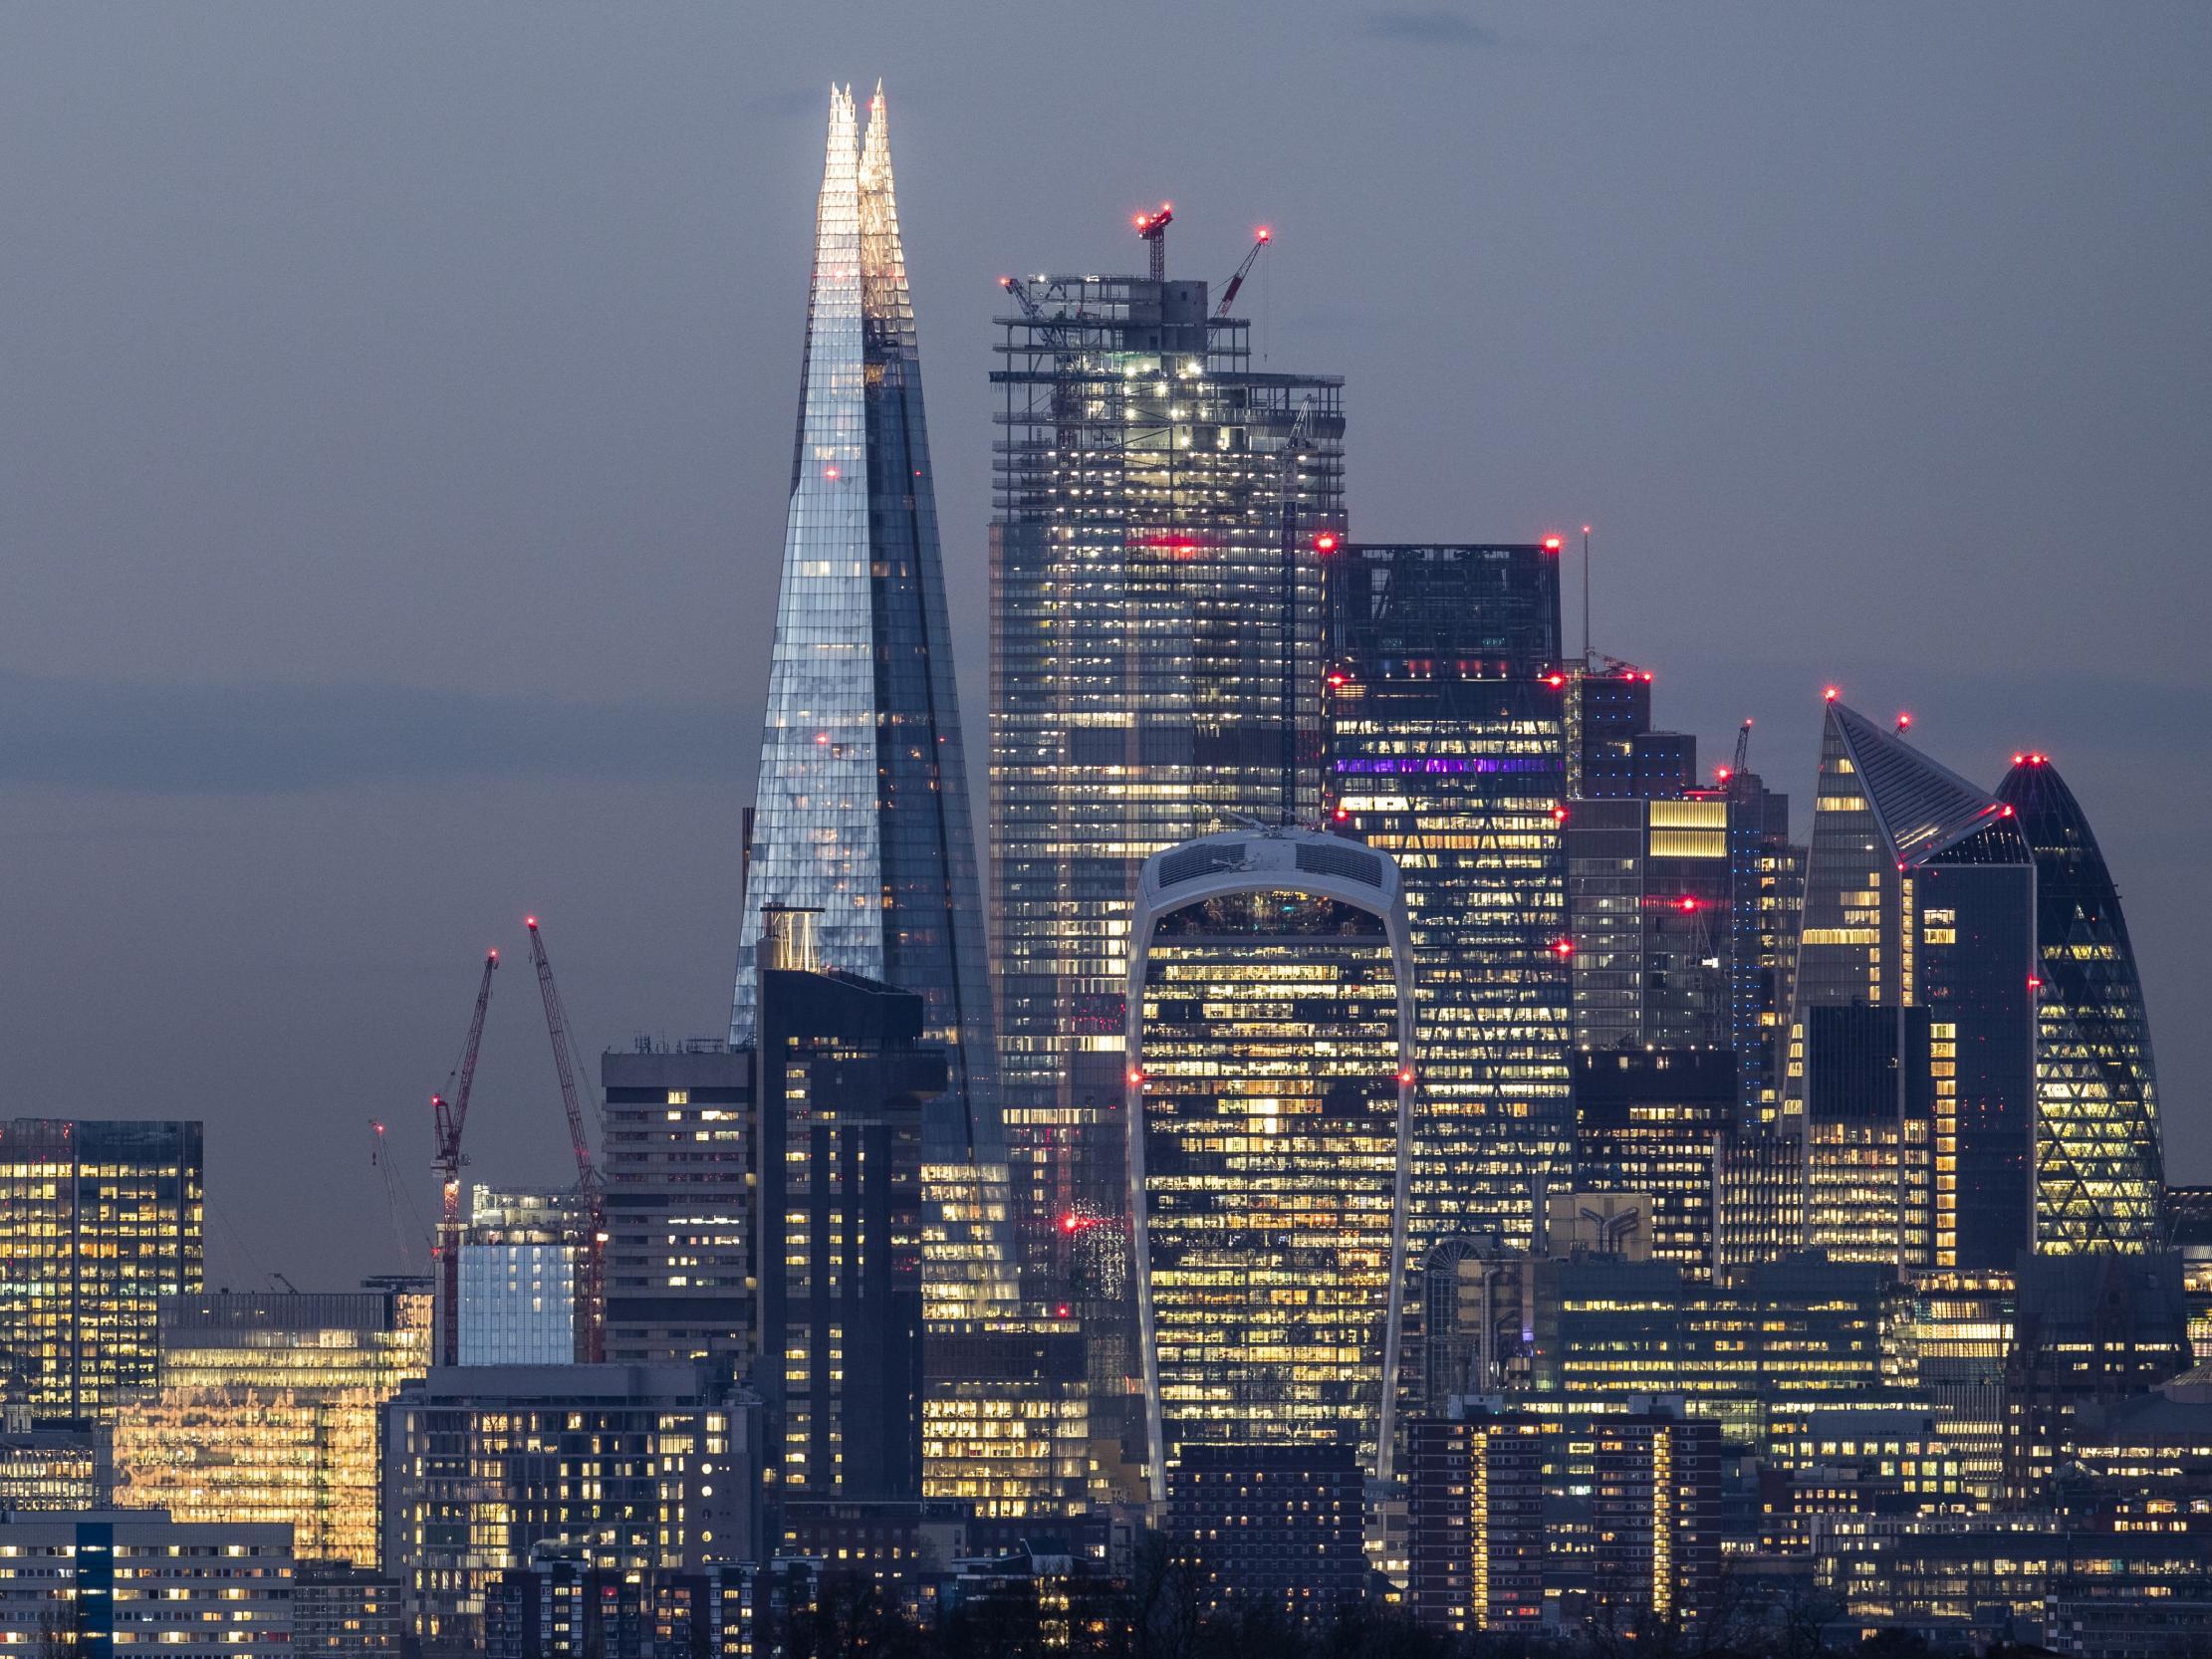 As the City of London prepares for annual report season, trust in British business is at an all time low